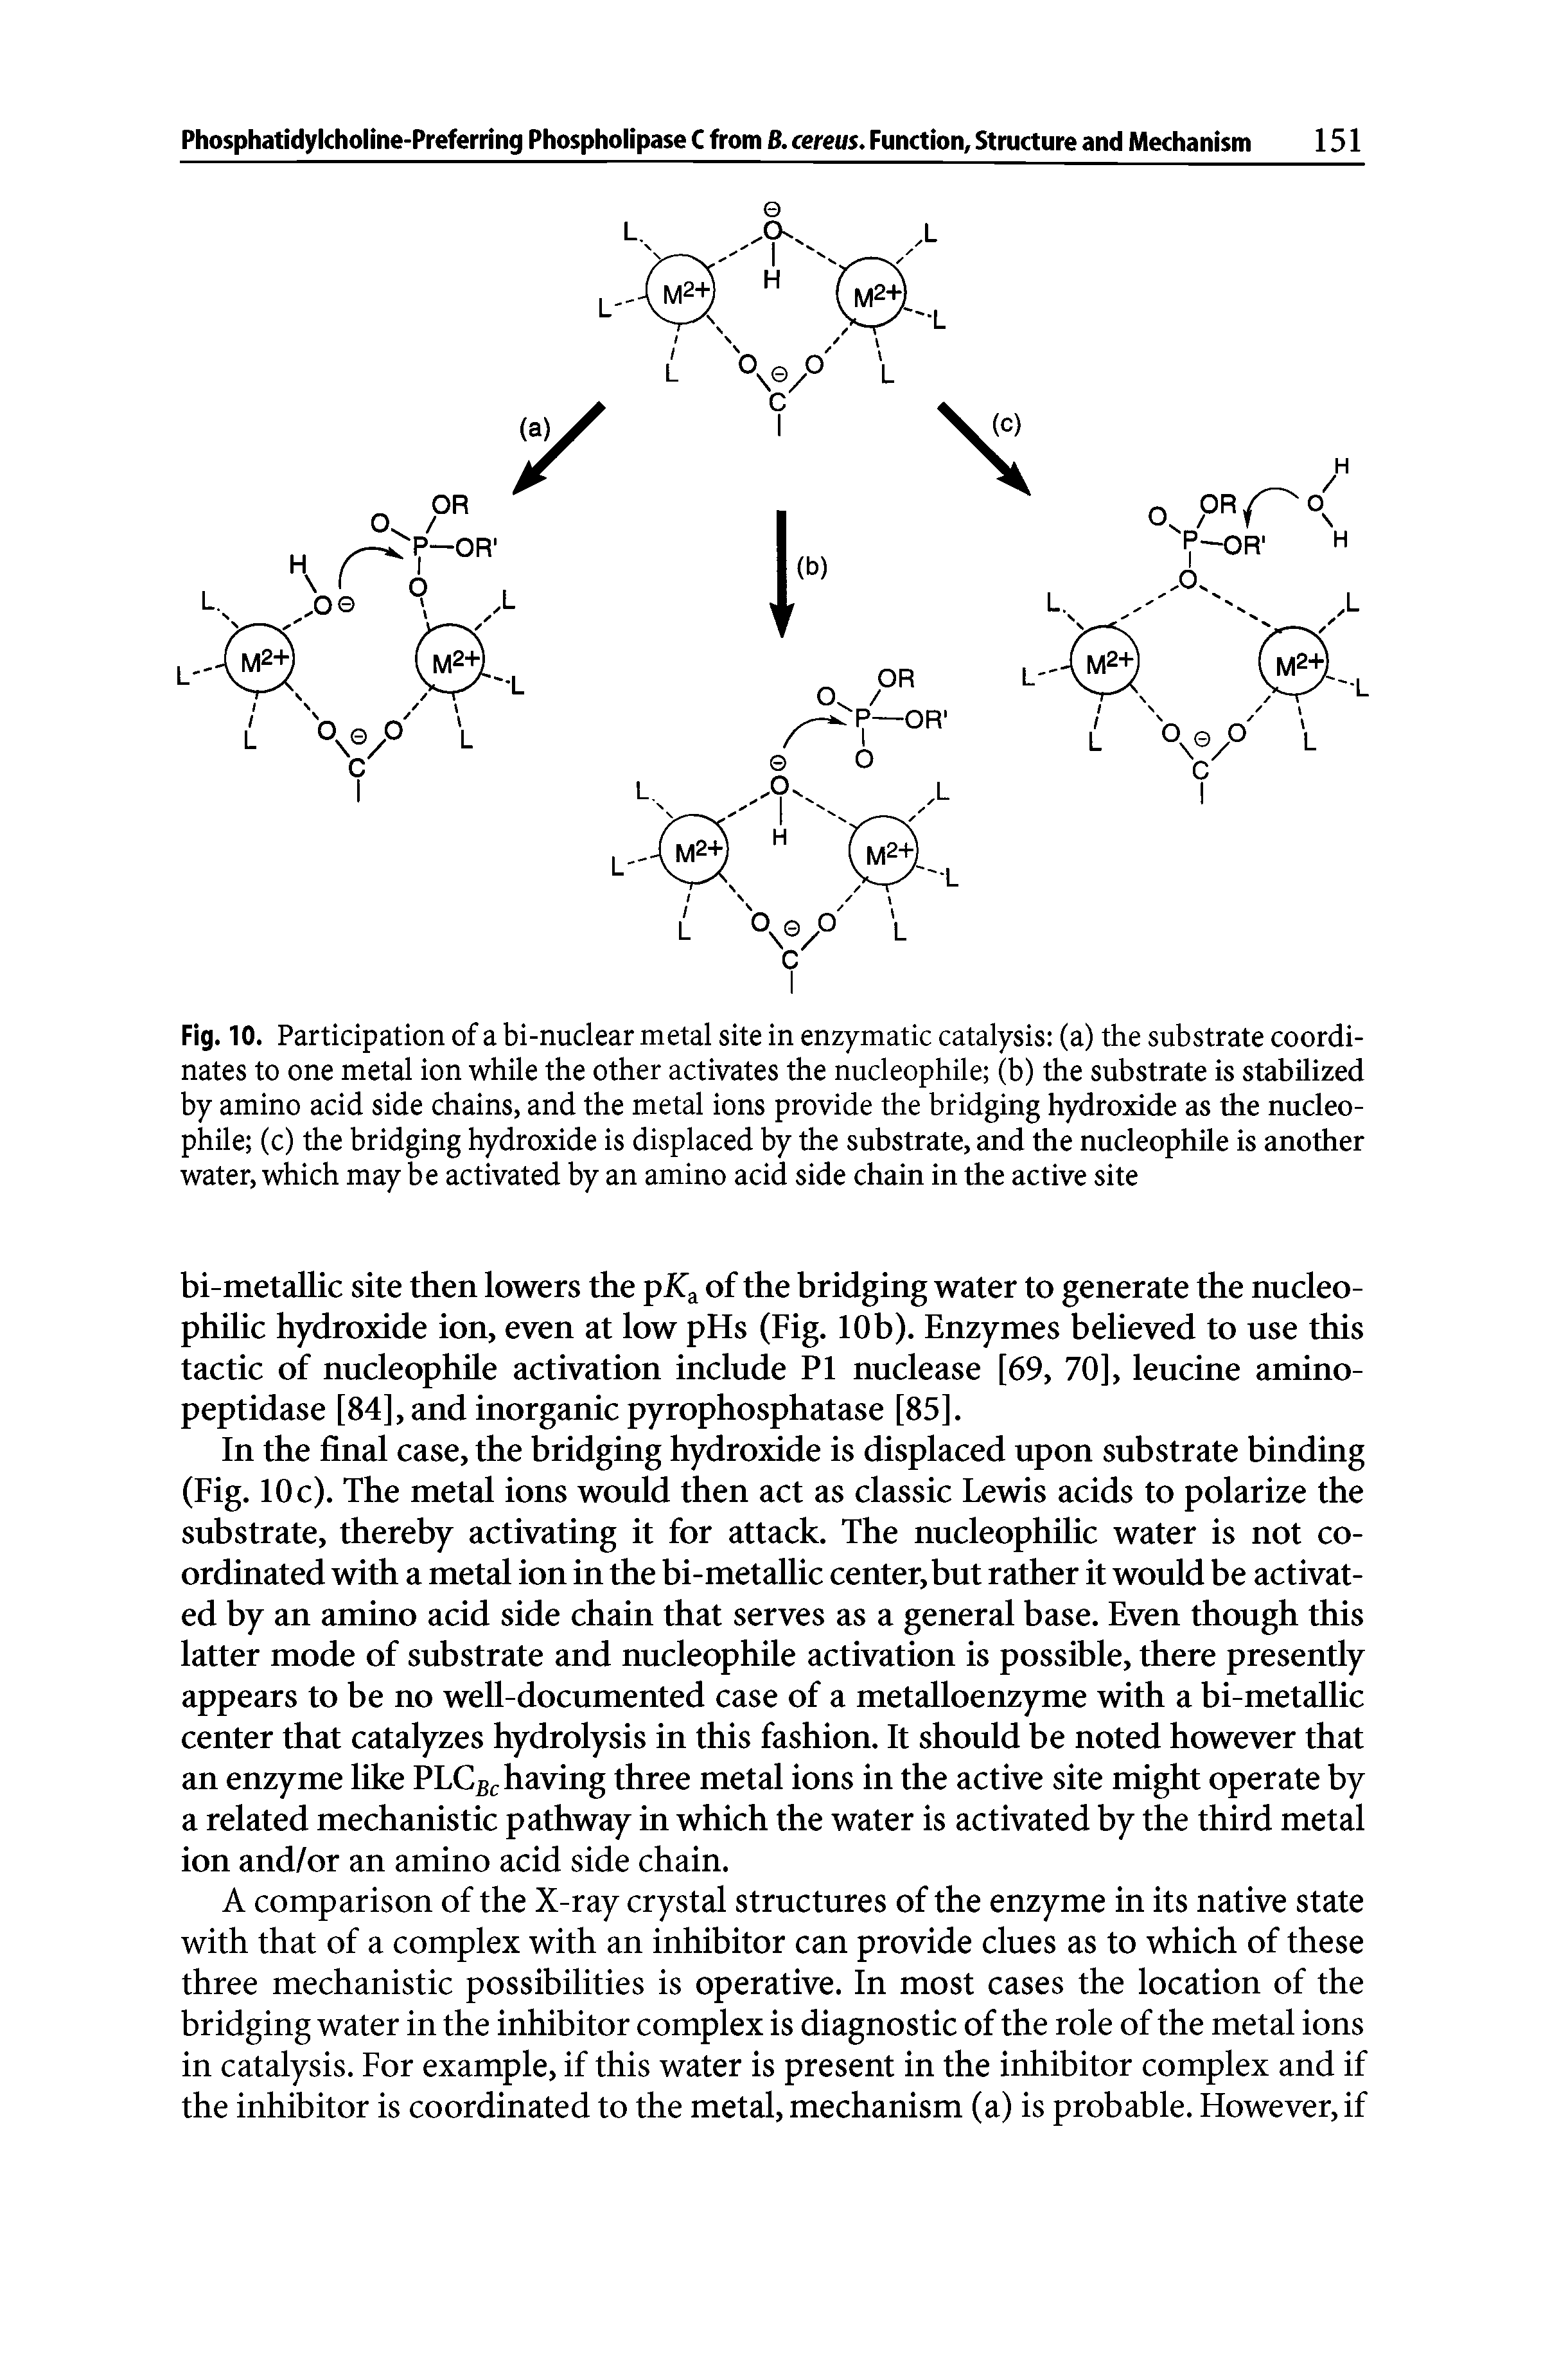 Fig. 10. Participation of a bi-nuclear metal site in enzymatic catalysis (a) the substrate coordinates to one metal ion while the other activates the nucleophile (b) the substrate is stabilized by amino acid side chains, and the metal ions provide the bridging hydroxide as the nucleophile (c) the bridging hydroxide is displaced by the substrate, and the nucleophile is another water, which may be activated by an amino acid side chain in the active site...